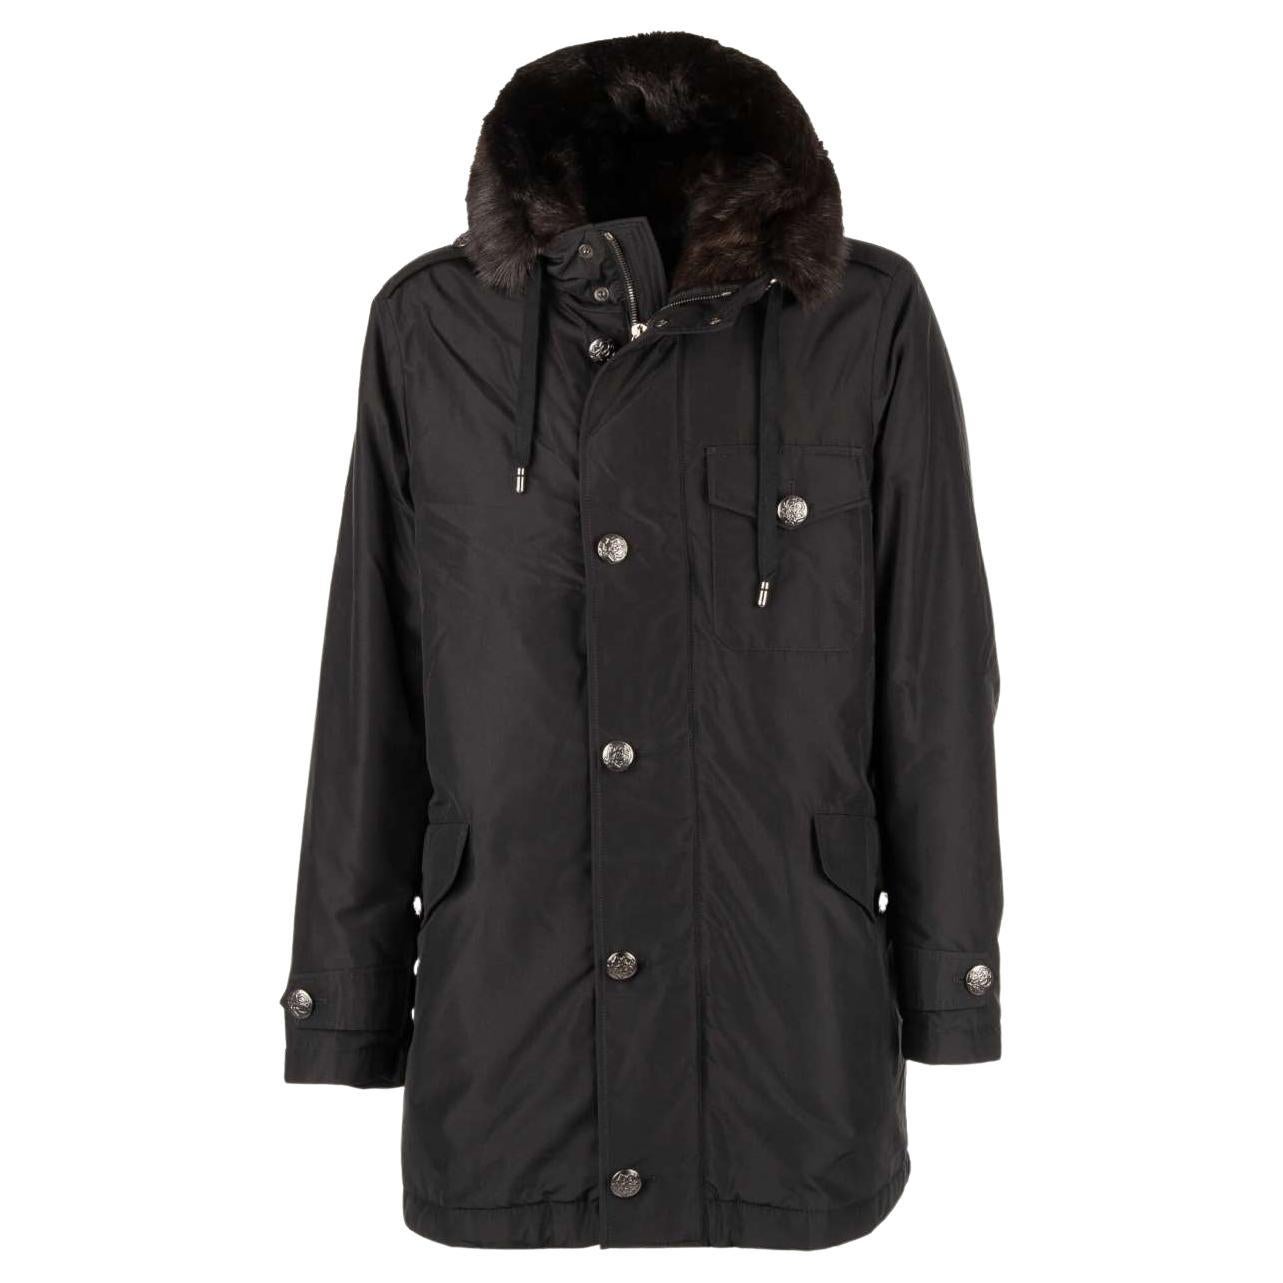 Dolce & Gabbana Silk Parka Jacket with Detachable Fur Lining and Hoody Black 48 For Sale